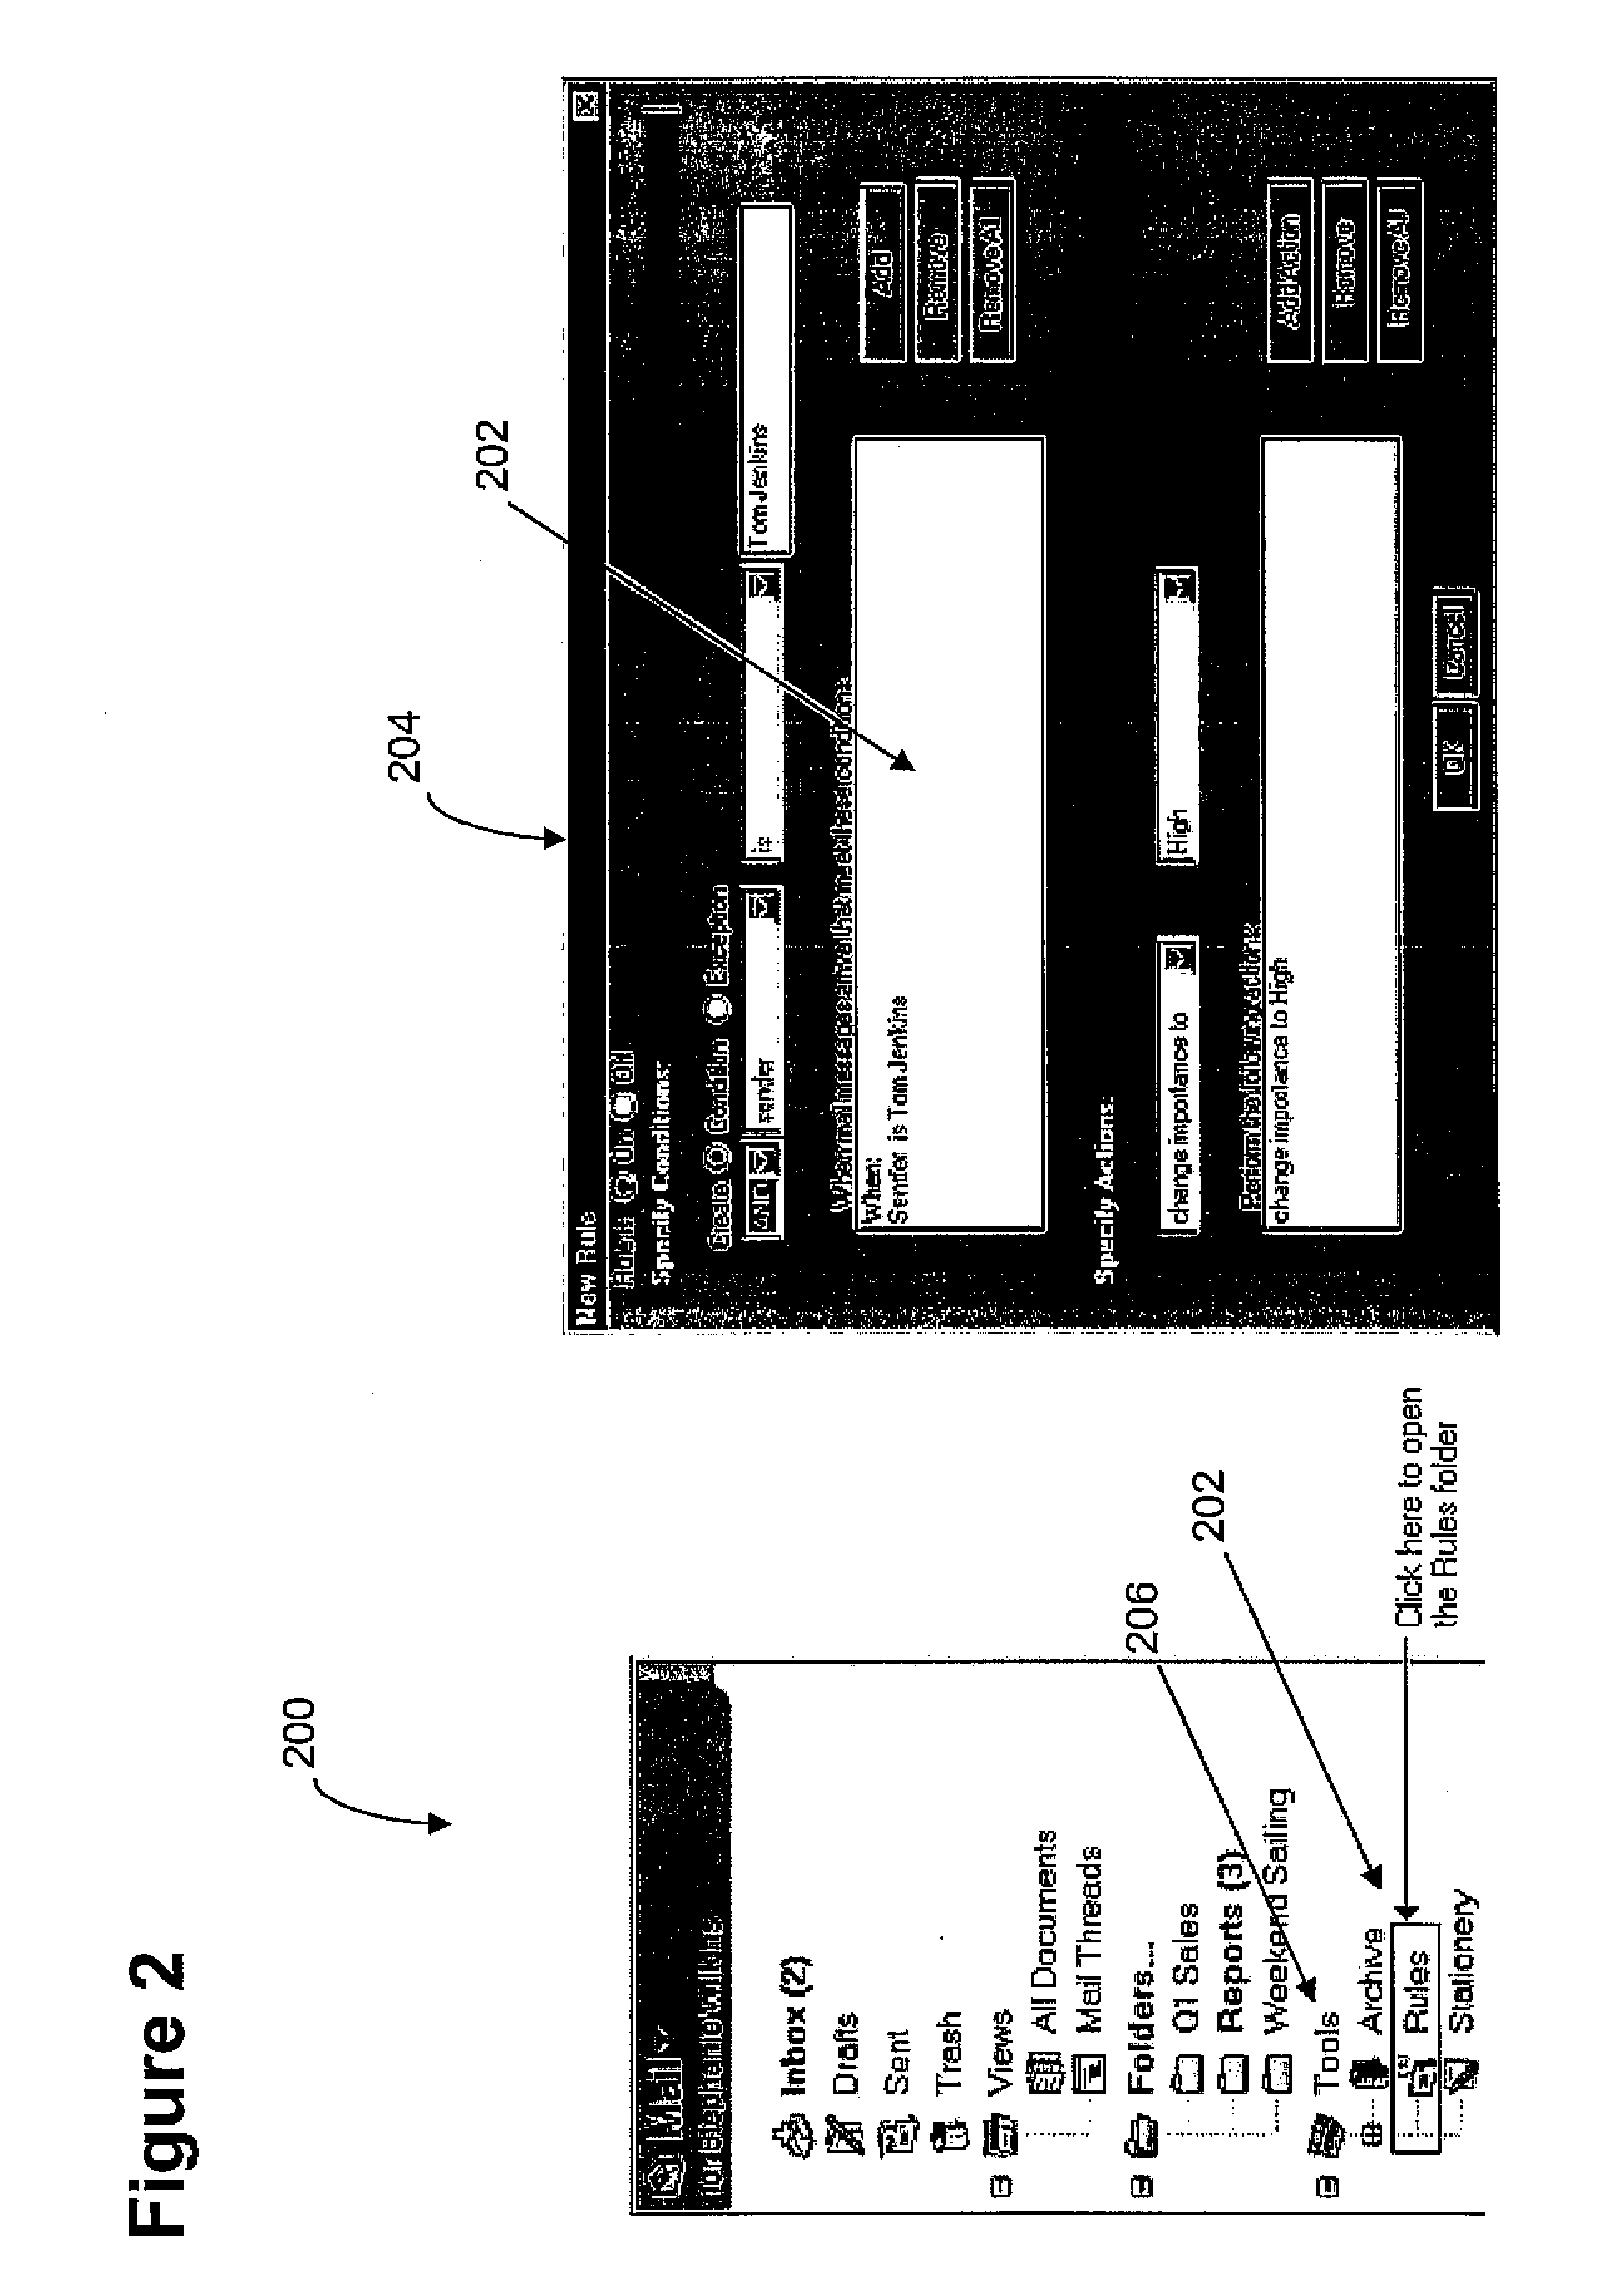 System and method for end-user management of e-mail threads using a single click